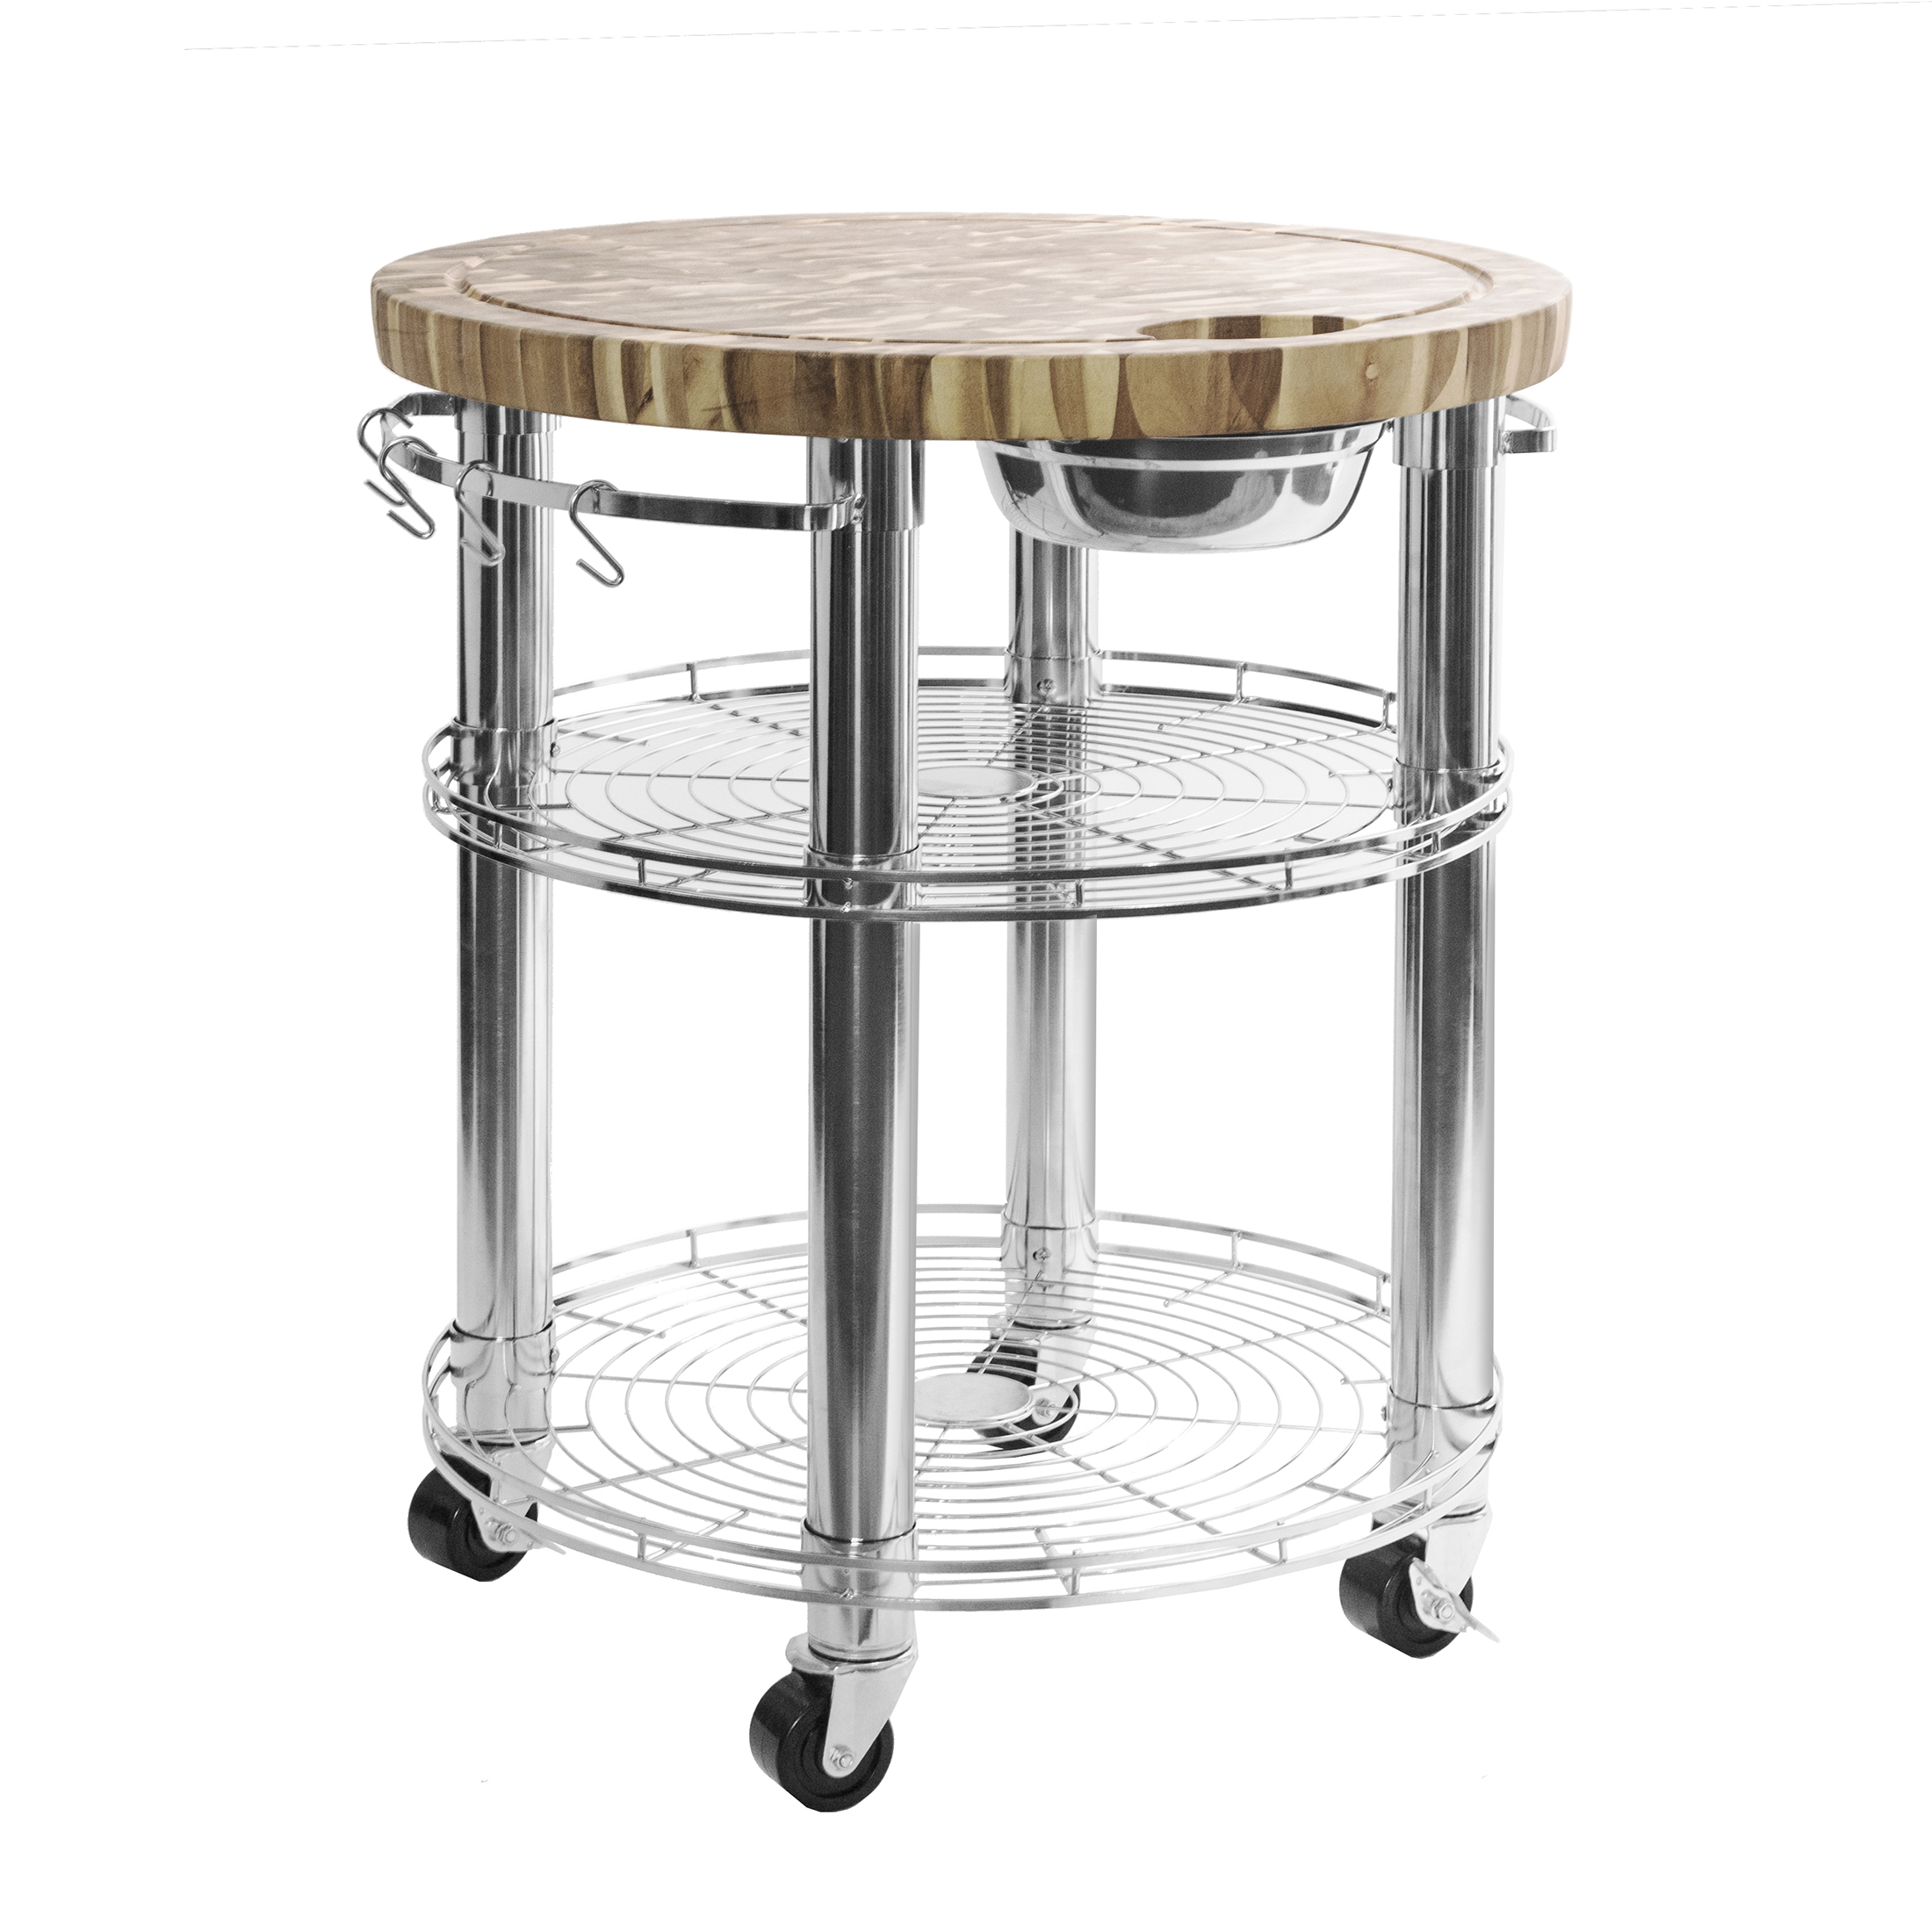 Seville Classics Rolling Butcher Block Top Kitchen Island Cart with Storage, 30 in Diameter x 36 in H - image 1 of 6